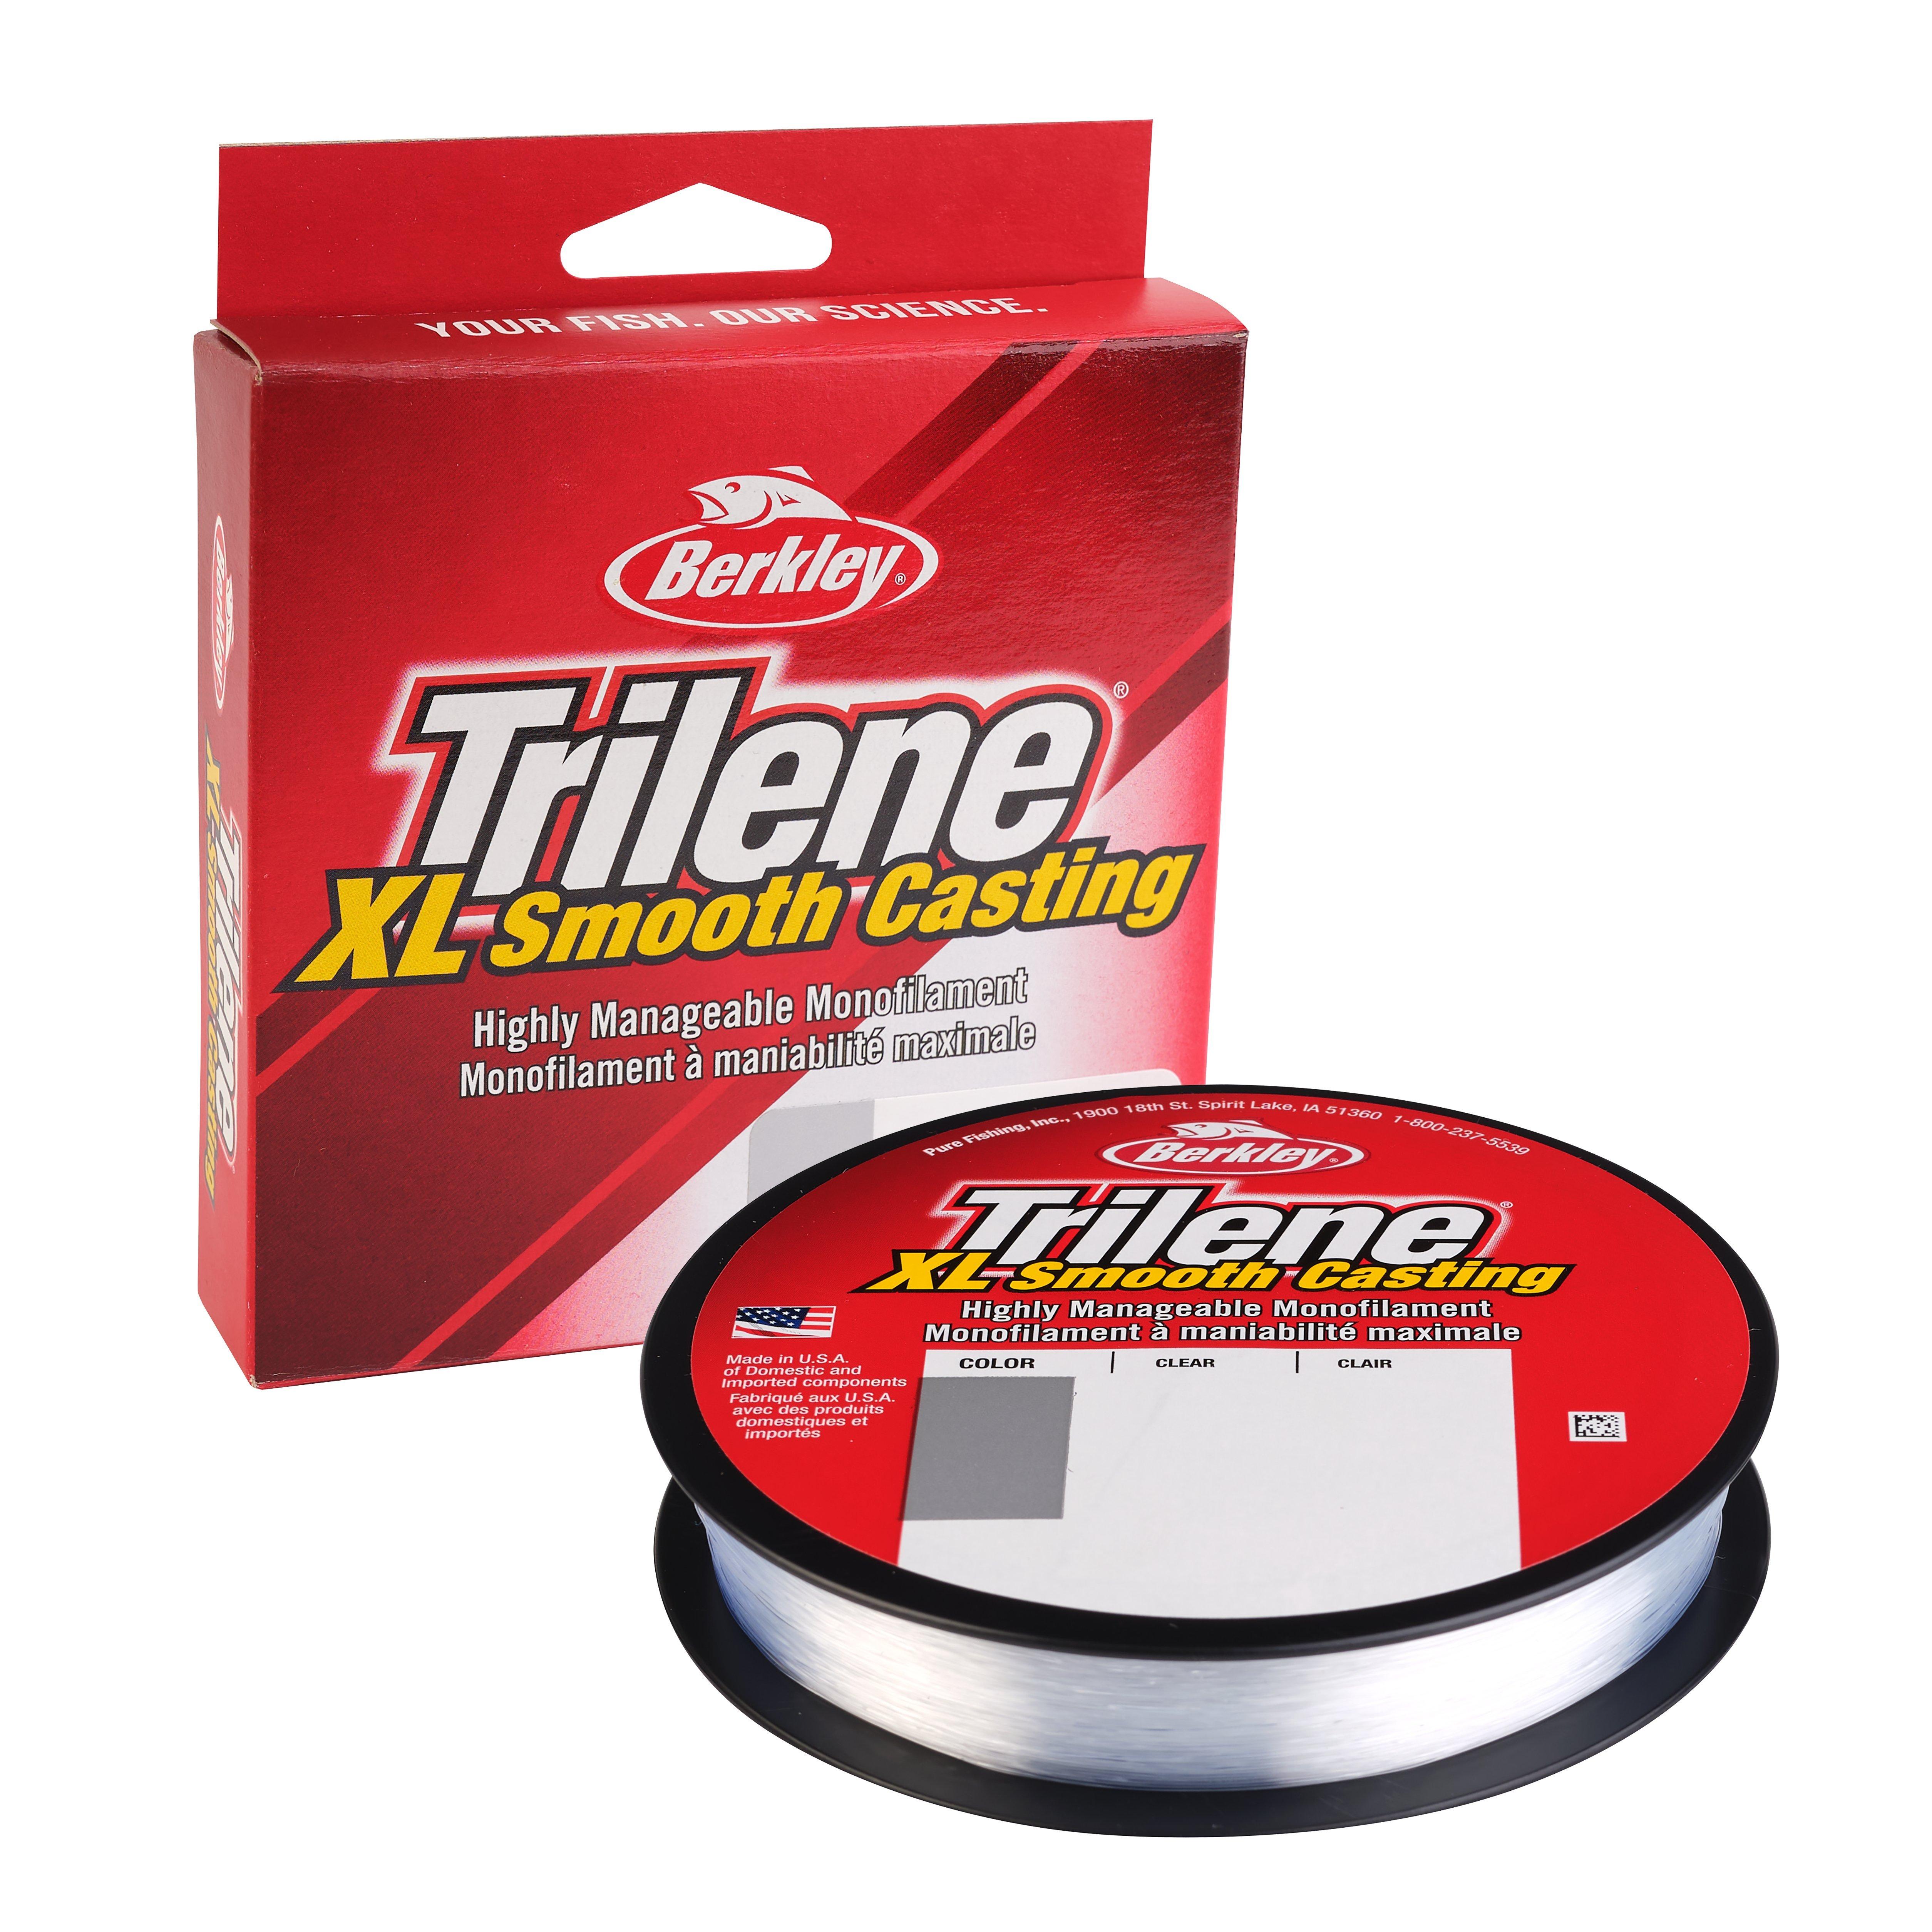  FluoroShield, Clear, 6lb 2.7kg, 3000yd 2743m Fishing Line,  Suitable For Freshwater Environments